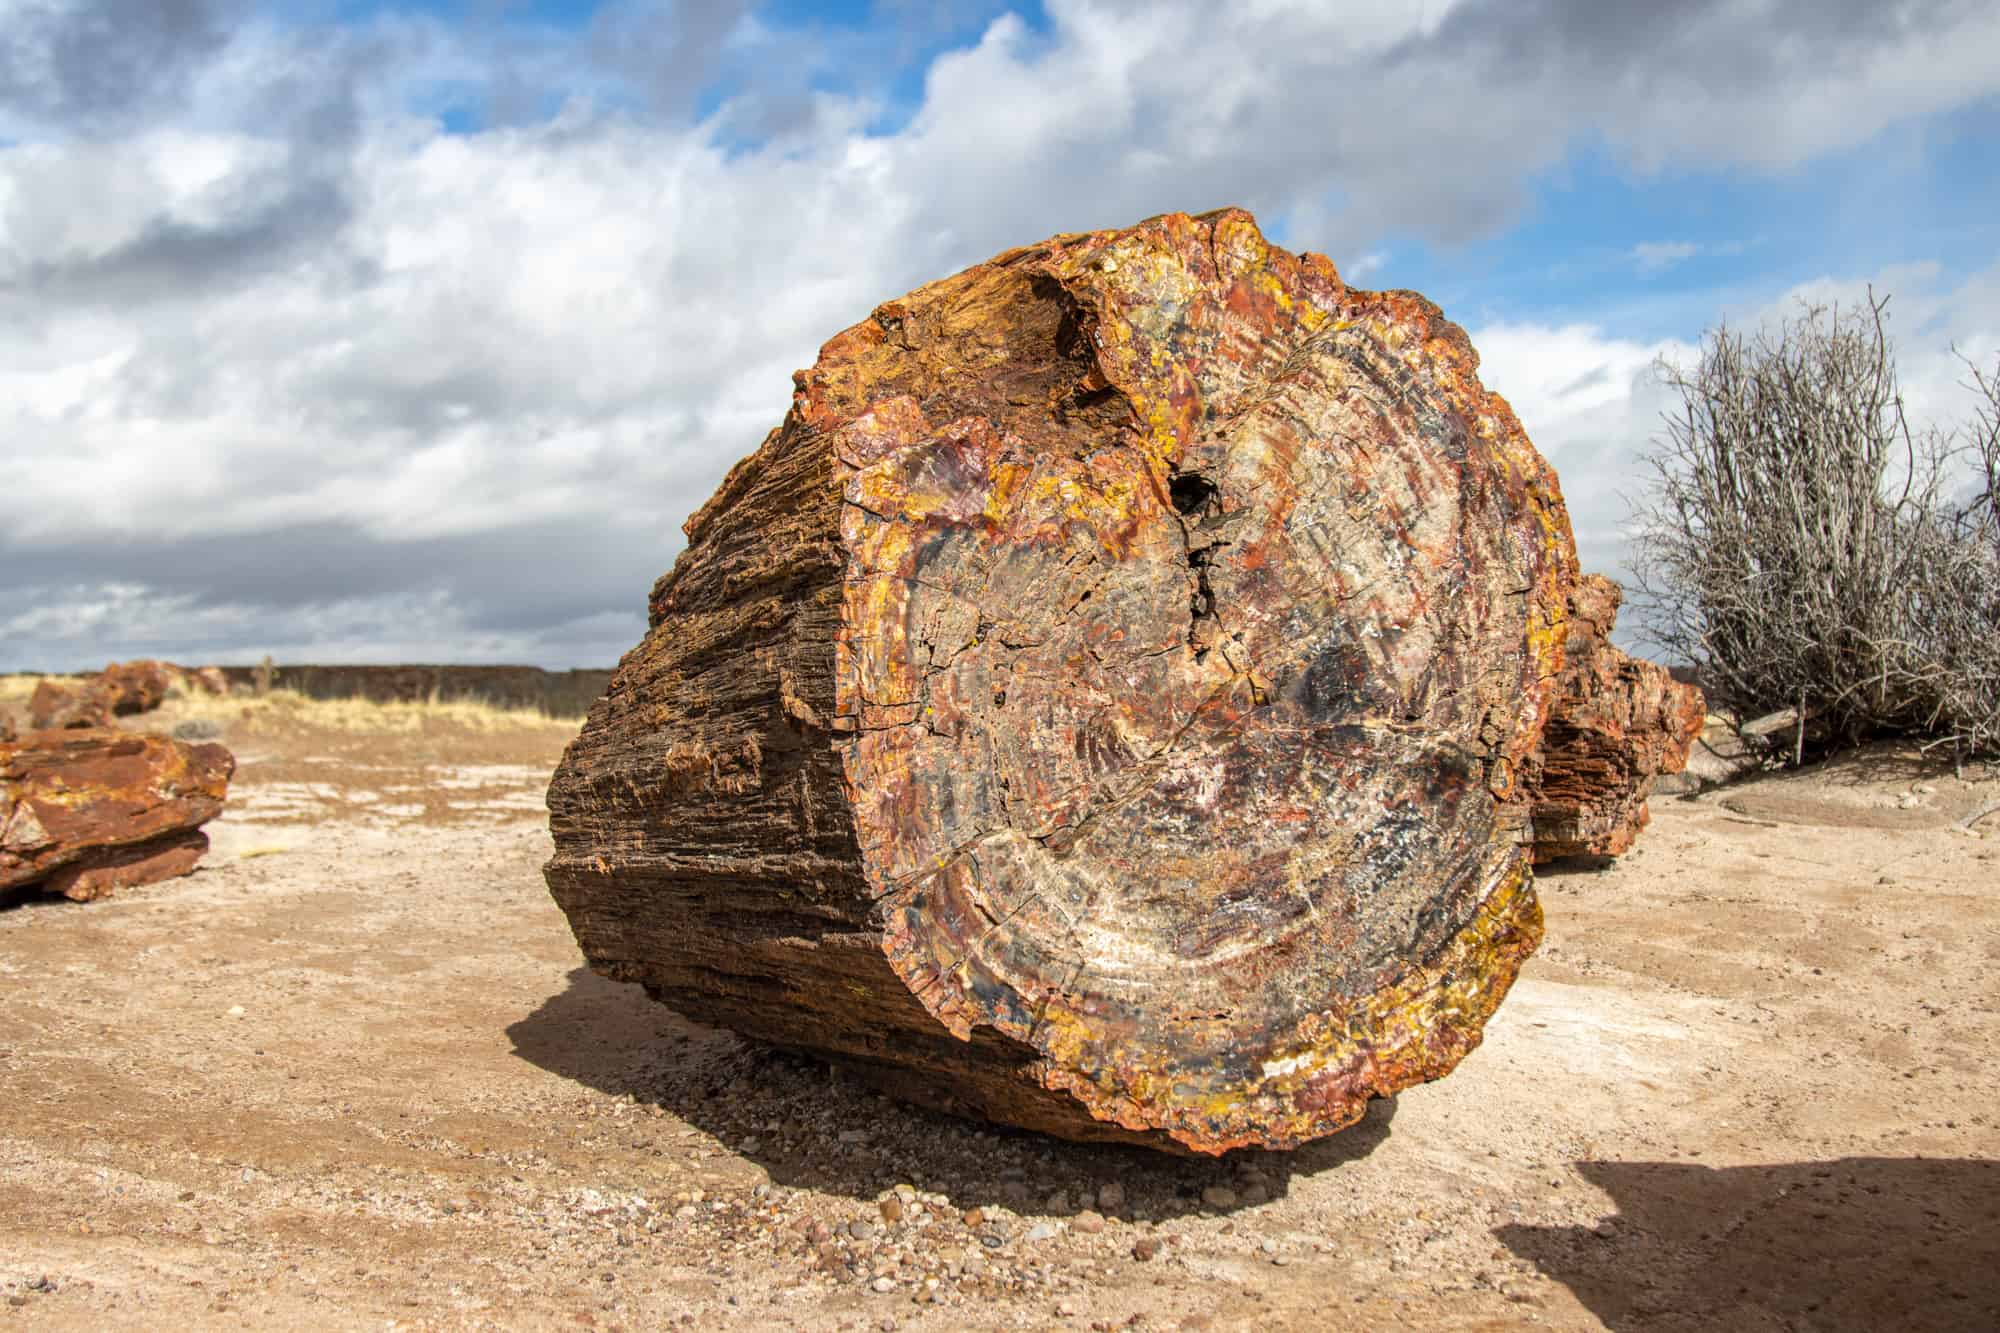 heading from saguaro to petrified forest gives you the opportunity to see petrified wood like what is shown here